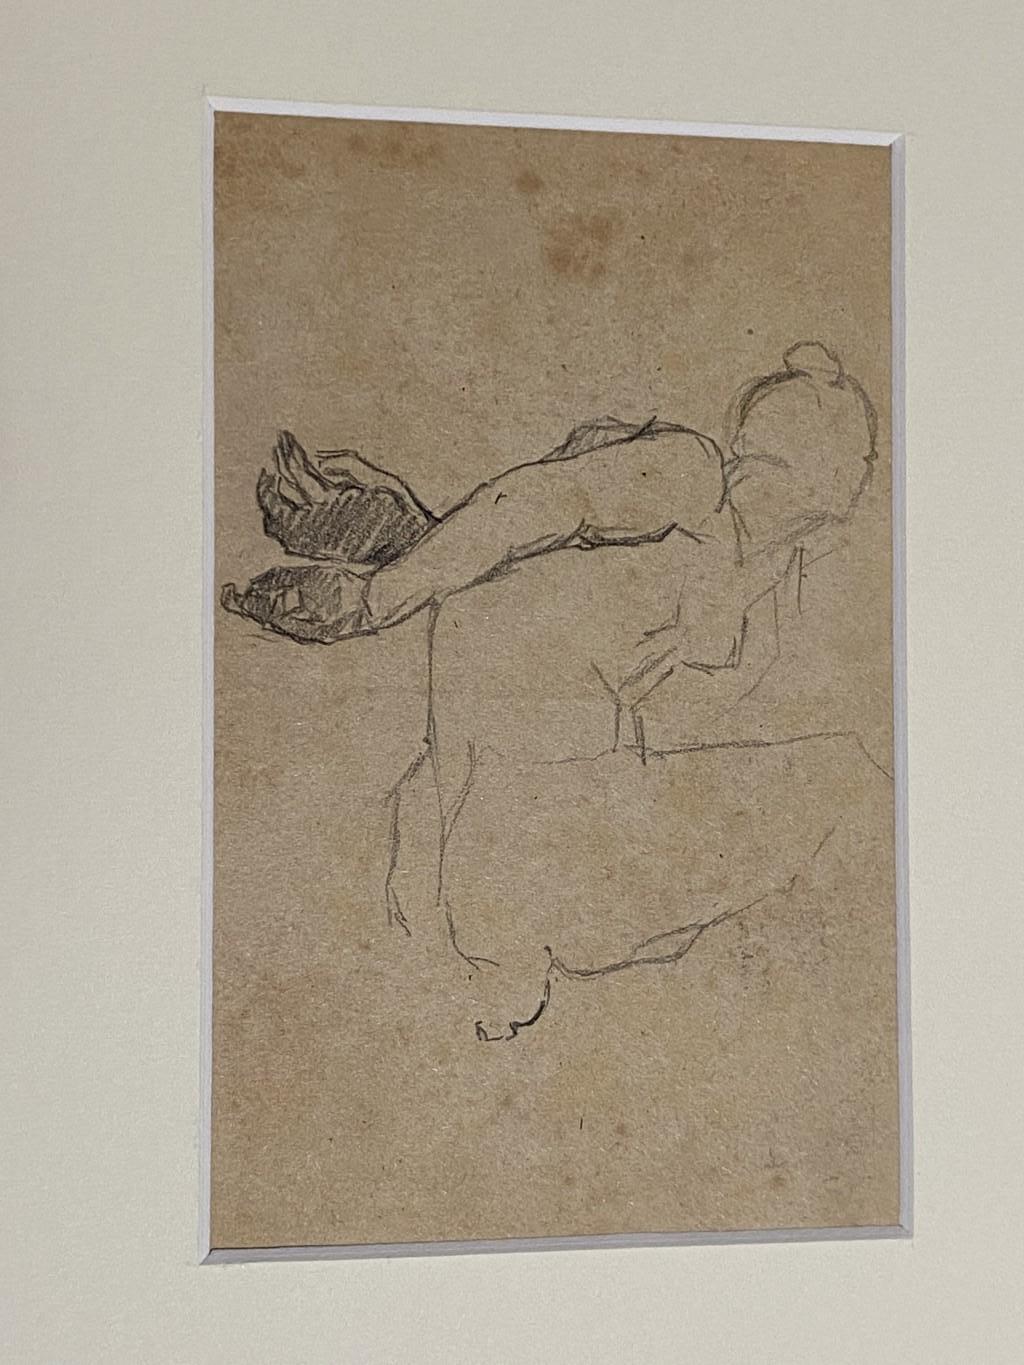 "Figure"  is an original pencil drawing on ivory-colorated cardboard by Beppe Curzi in 1940.

In excellent conditions.

This is an original drawing representing a nude woman.

Not signed.

Image Dimensions: 17.5 x 11 cm